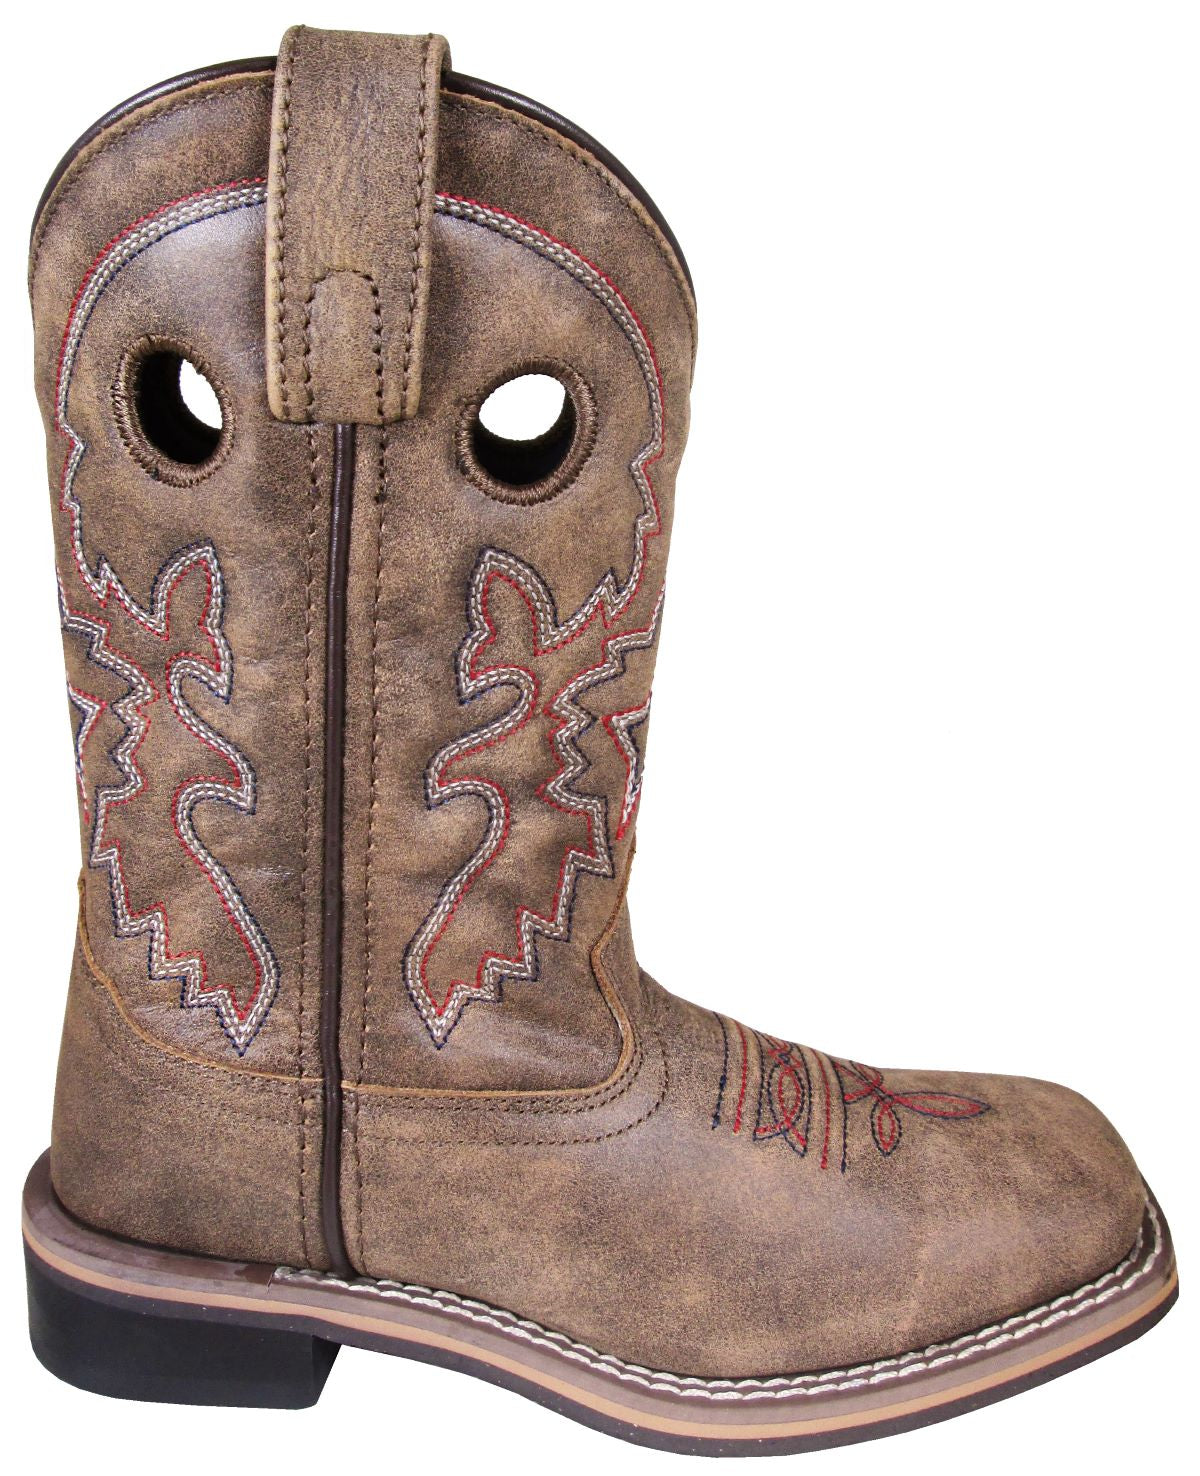 'Smoky Mountain' Children's Canyon Western Square Toe - Vintage Brown